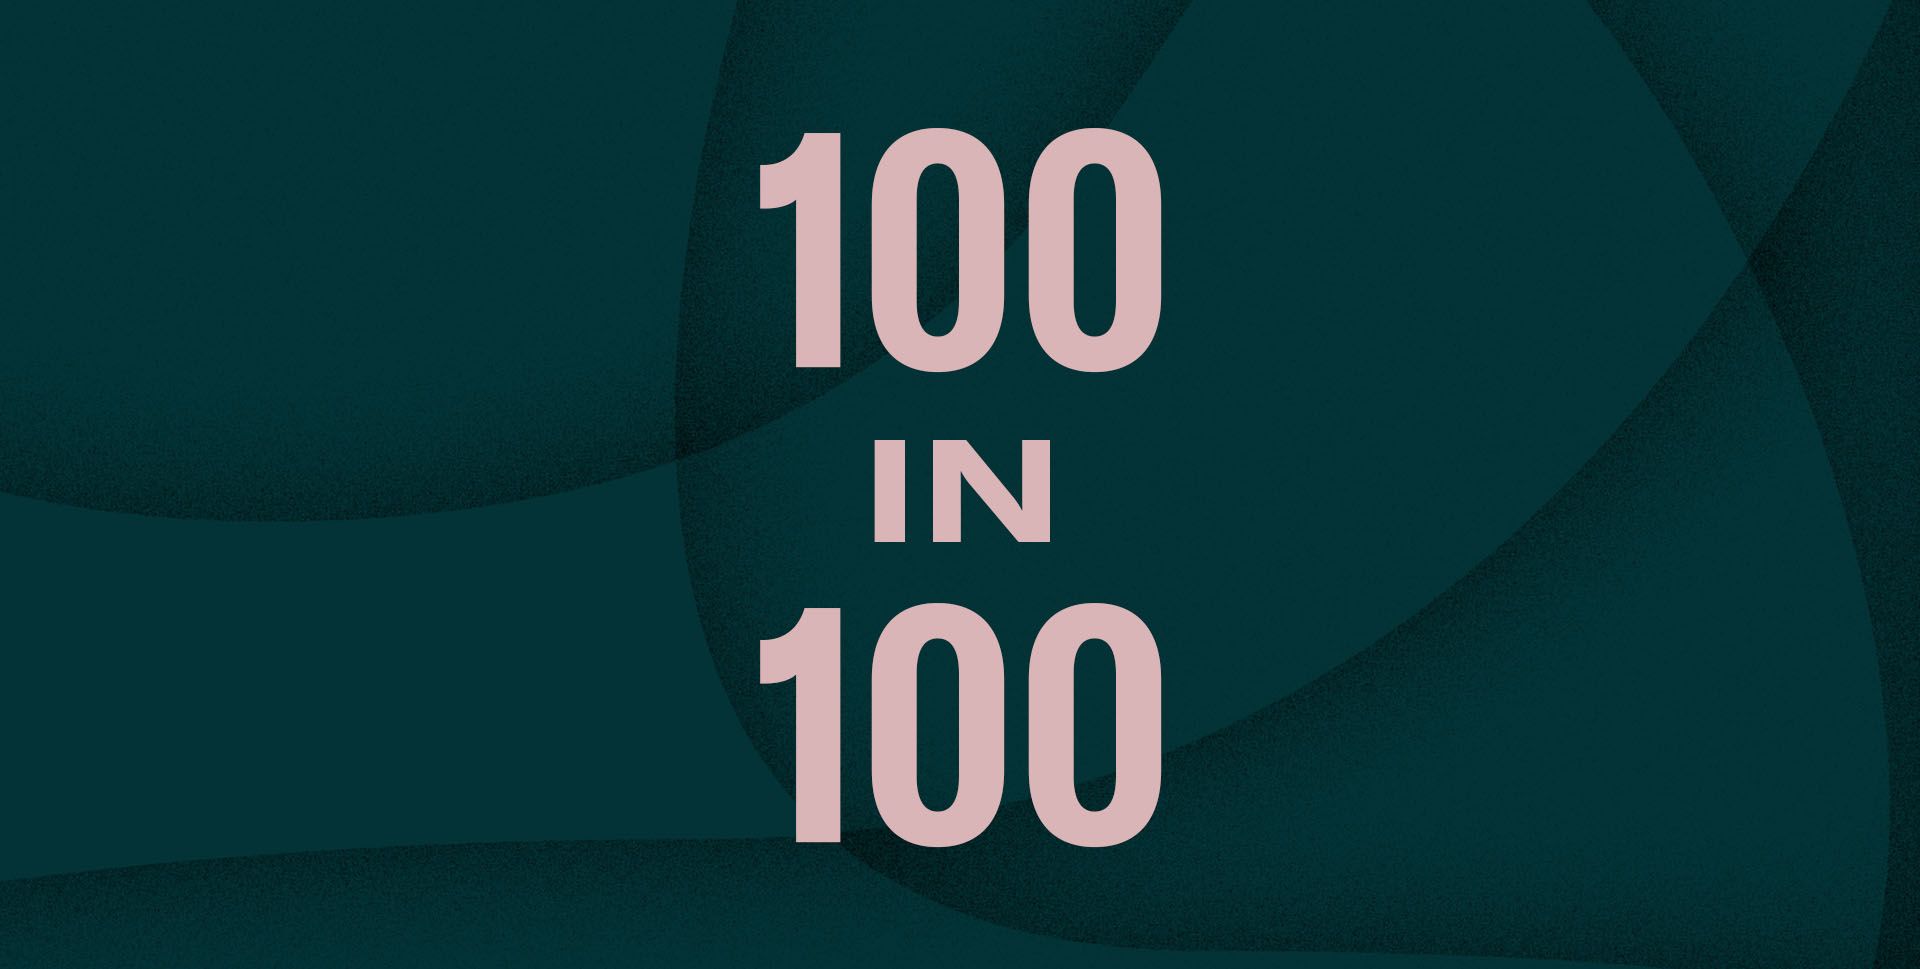 A New Campaign:  Introducing Trilith Foundation’s 100 in 100